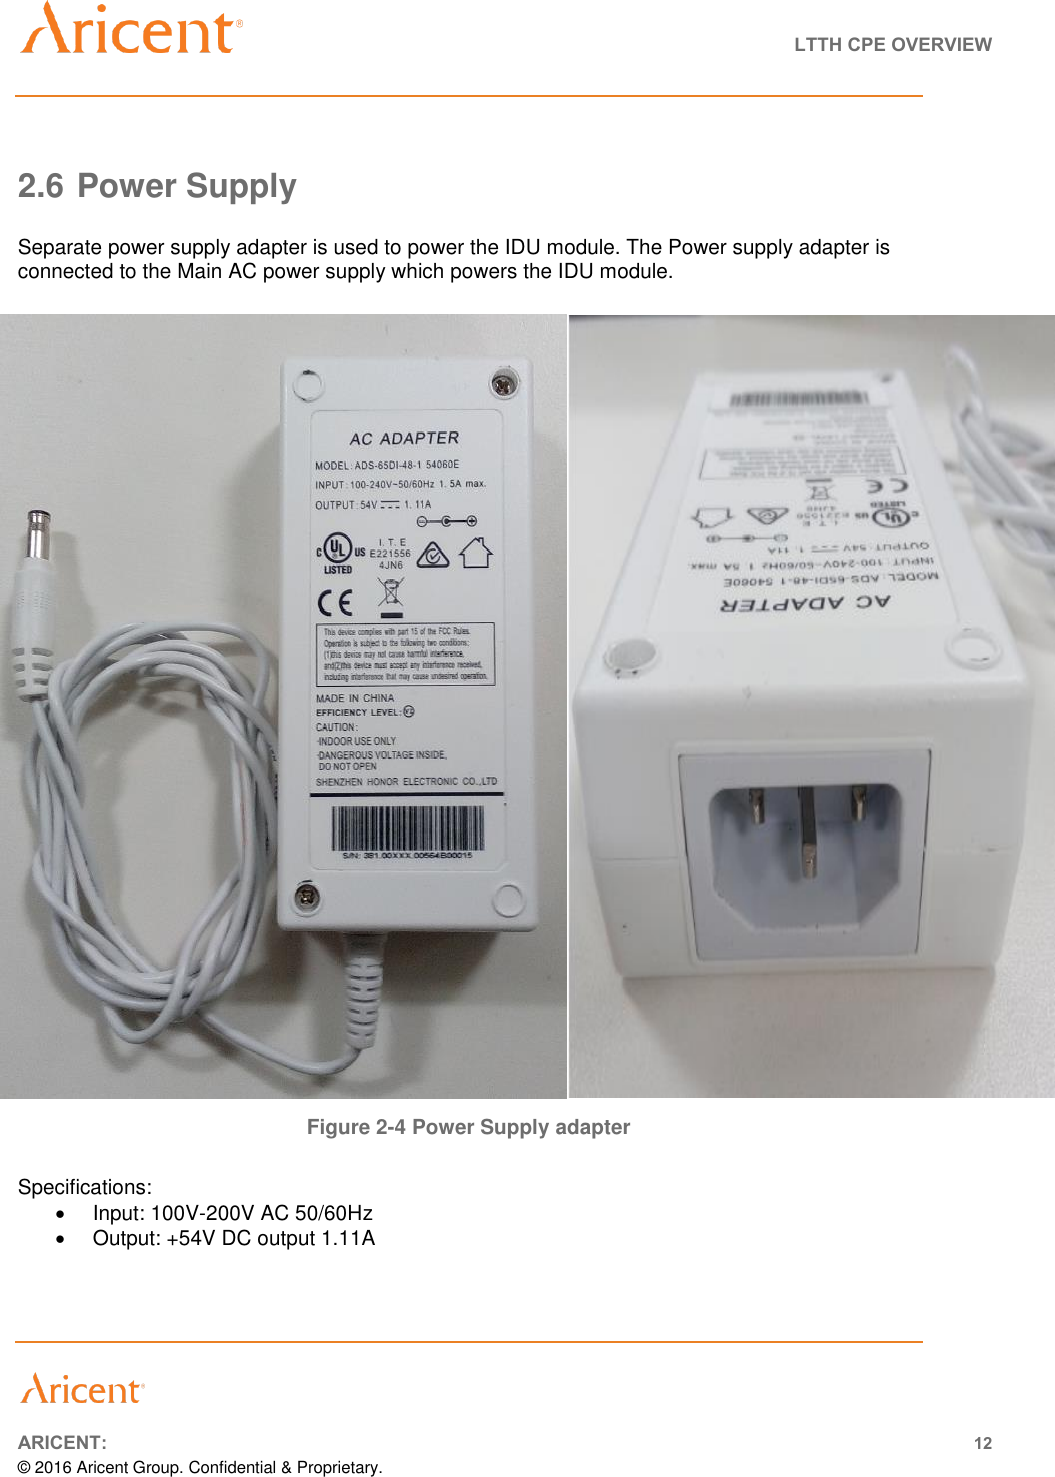   LTTH CPE OVERVIEW       ARICENT: 12 © 2016 Aricent Group. Confidential &amp; Proprietary.   2.6 Power Supply  Separate power supply adapter is used to power the IDU module. The Power supply adapter is connected to the Main AC power supply which powers the IDU module.                                   Figure 2-4 Power Supply adapter  Specifications:   Input: 100V-200V AC 50/60Hz   Output: +54V DC output 1.11A 